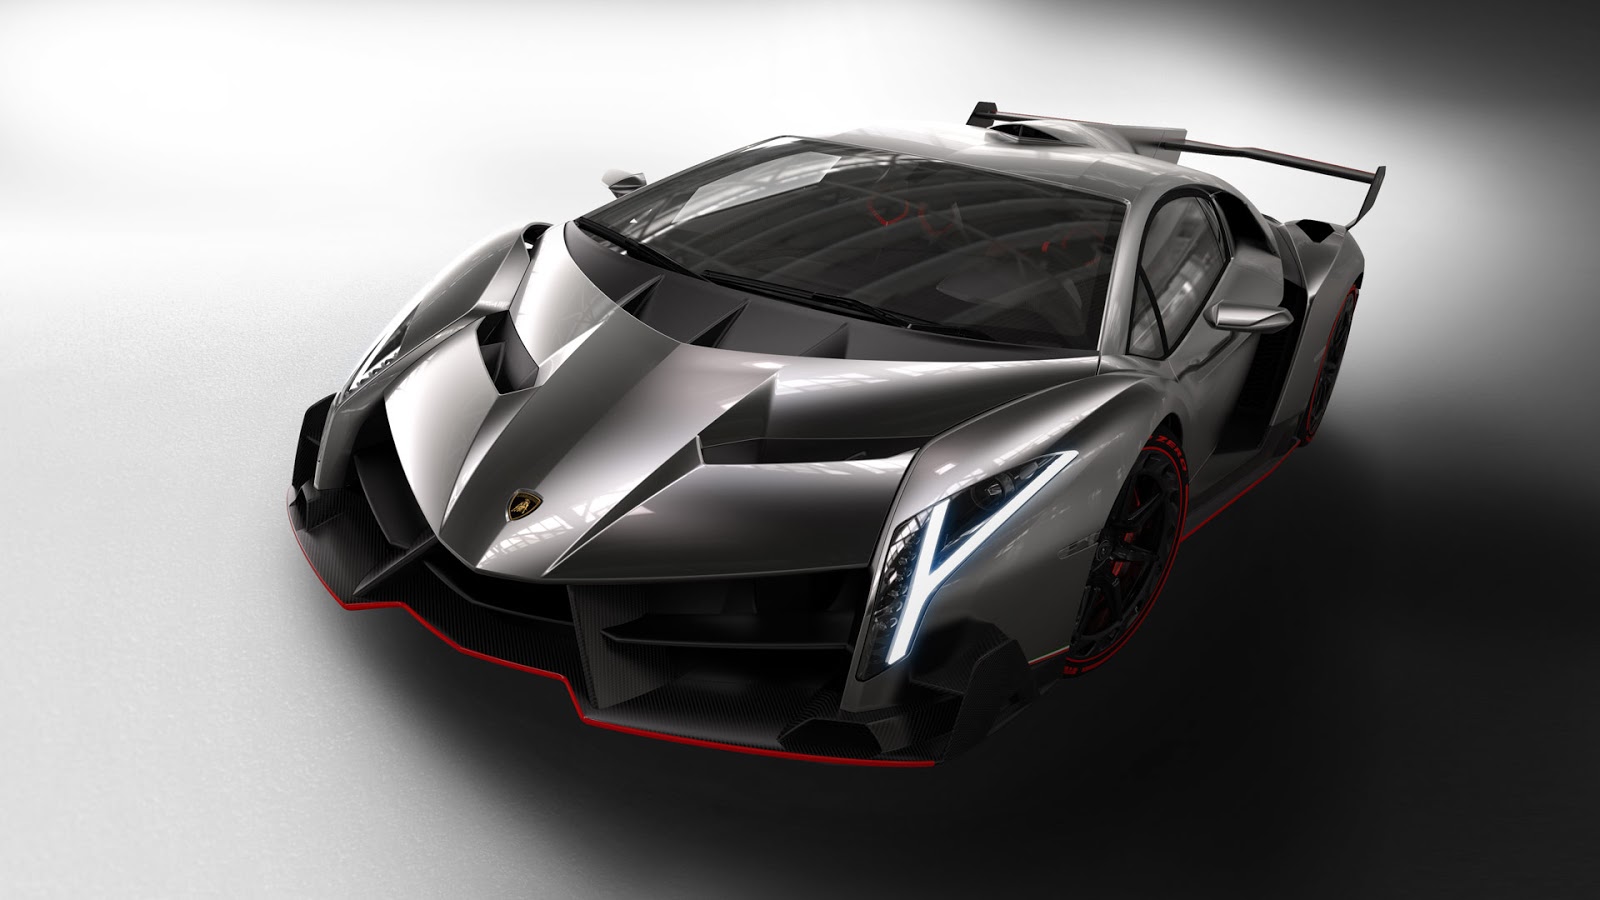 http://www.crazywallpapers.in/2014/02/best-lamborghini-veneno-pictures.html